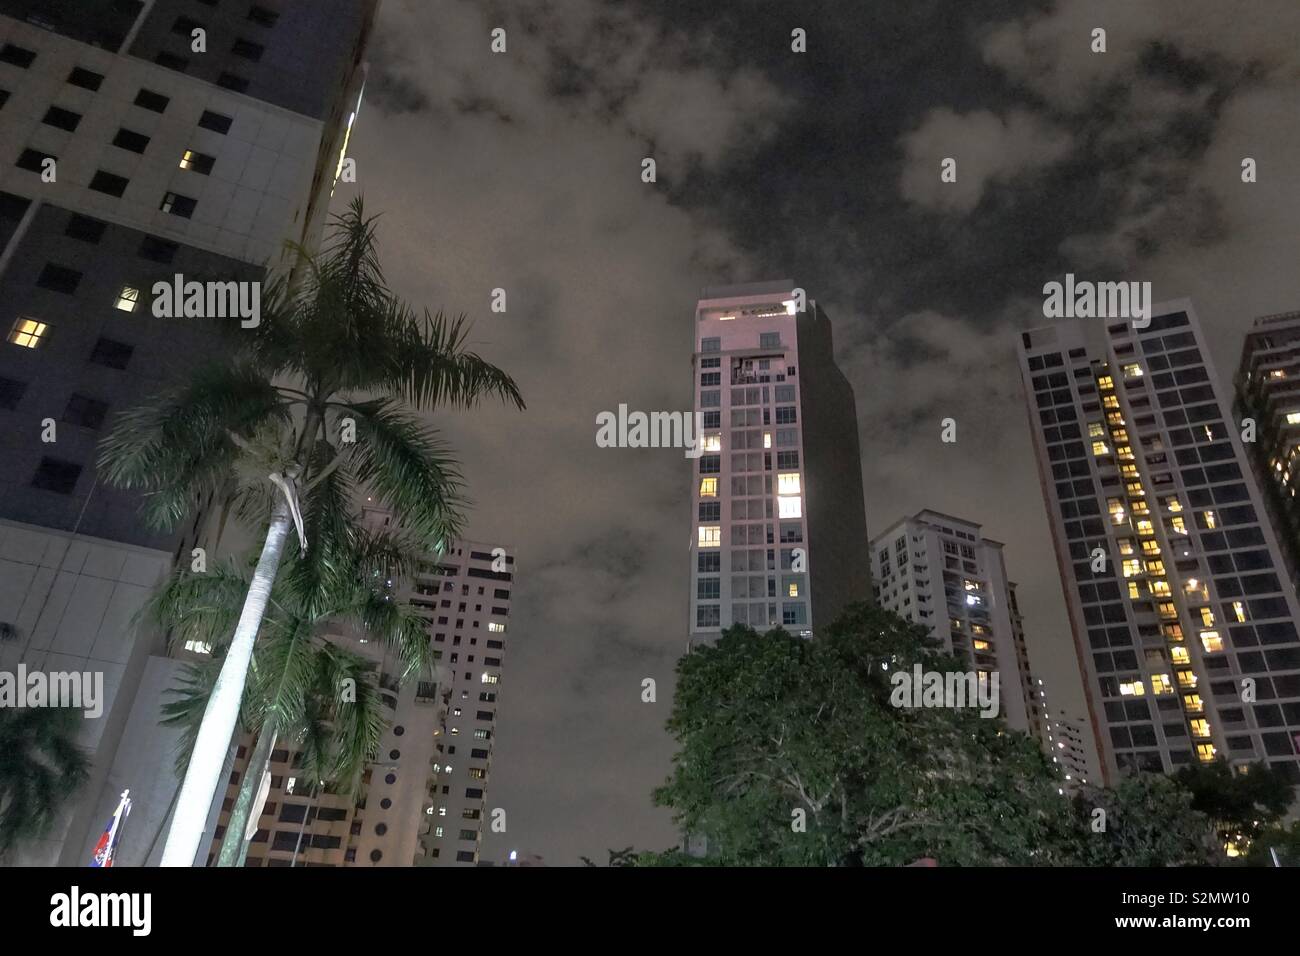 Kuala Lumpur by night - some block of flats, apartment buildings with a dramatic sky and some trees. Stock Photo